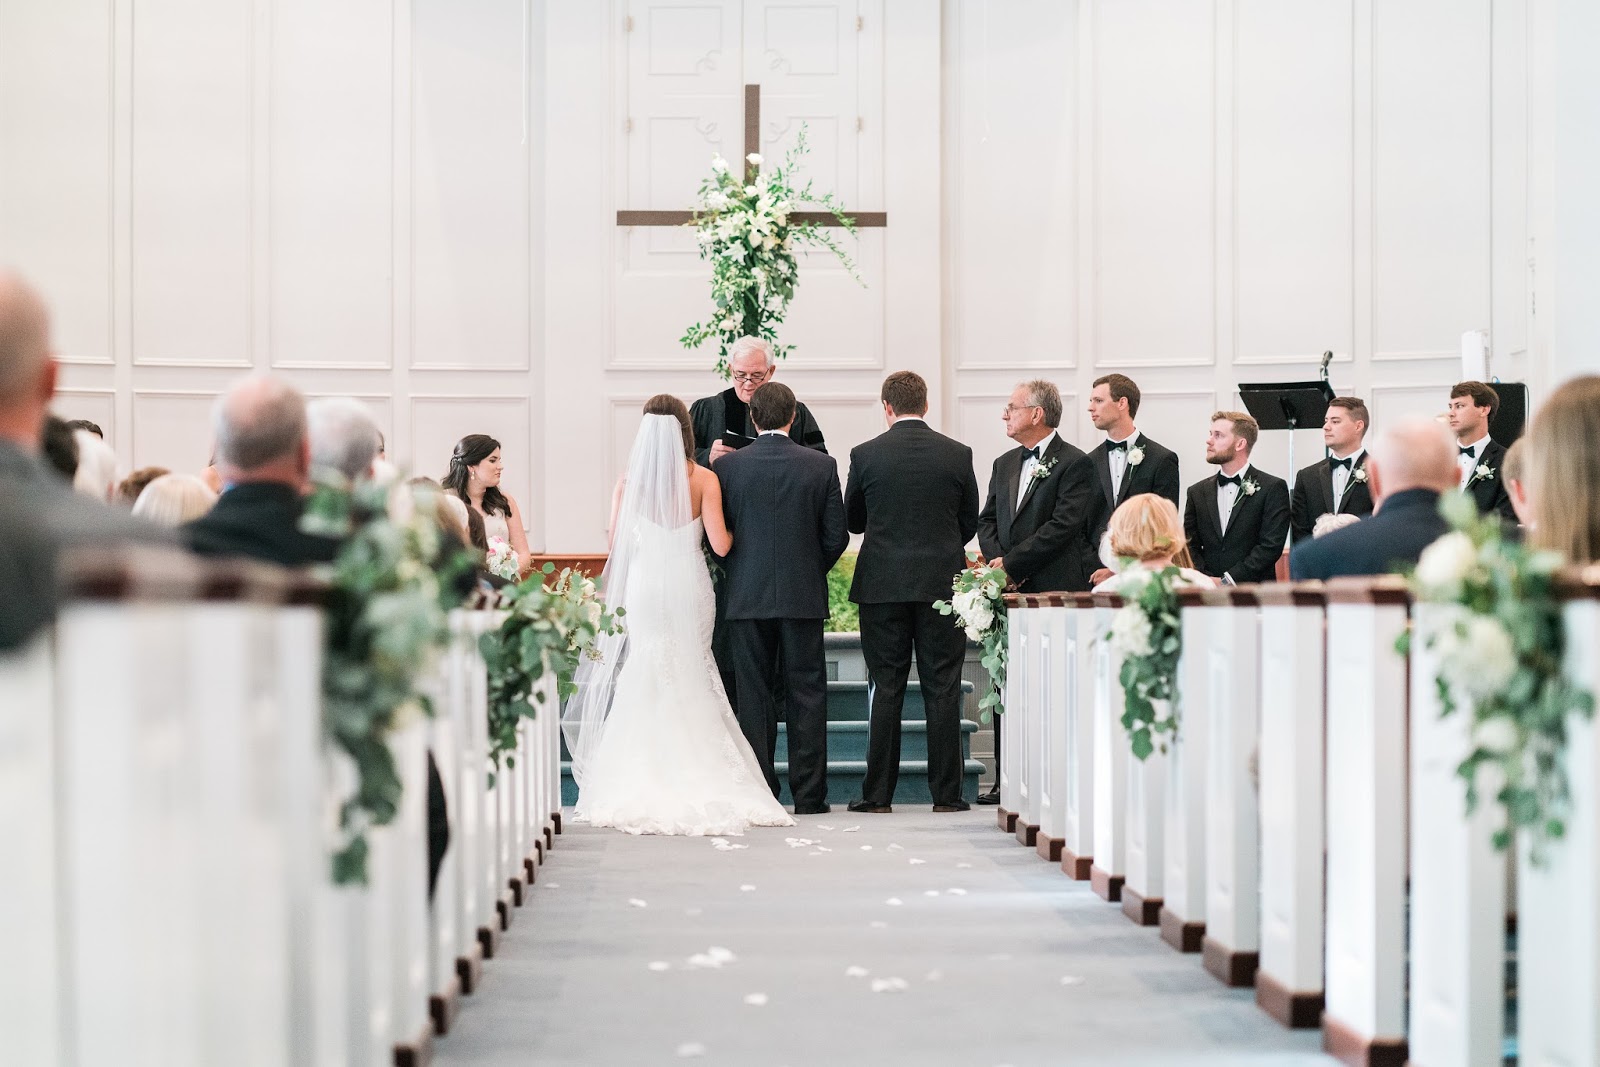 The Wedding Ceremony & Bridal Party Southern Style a